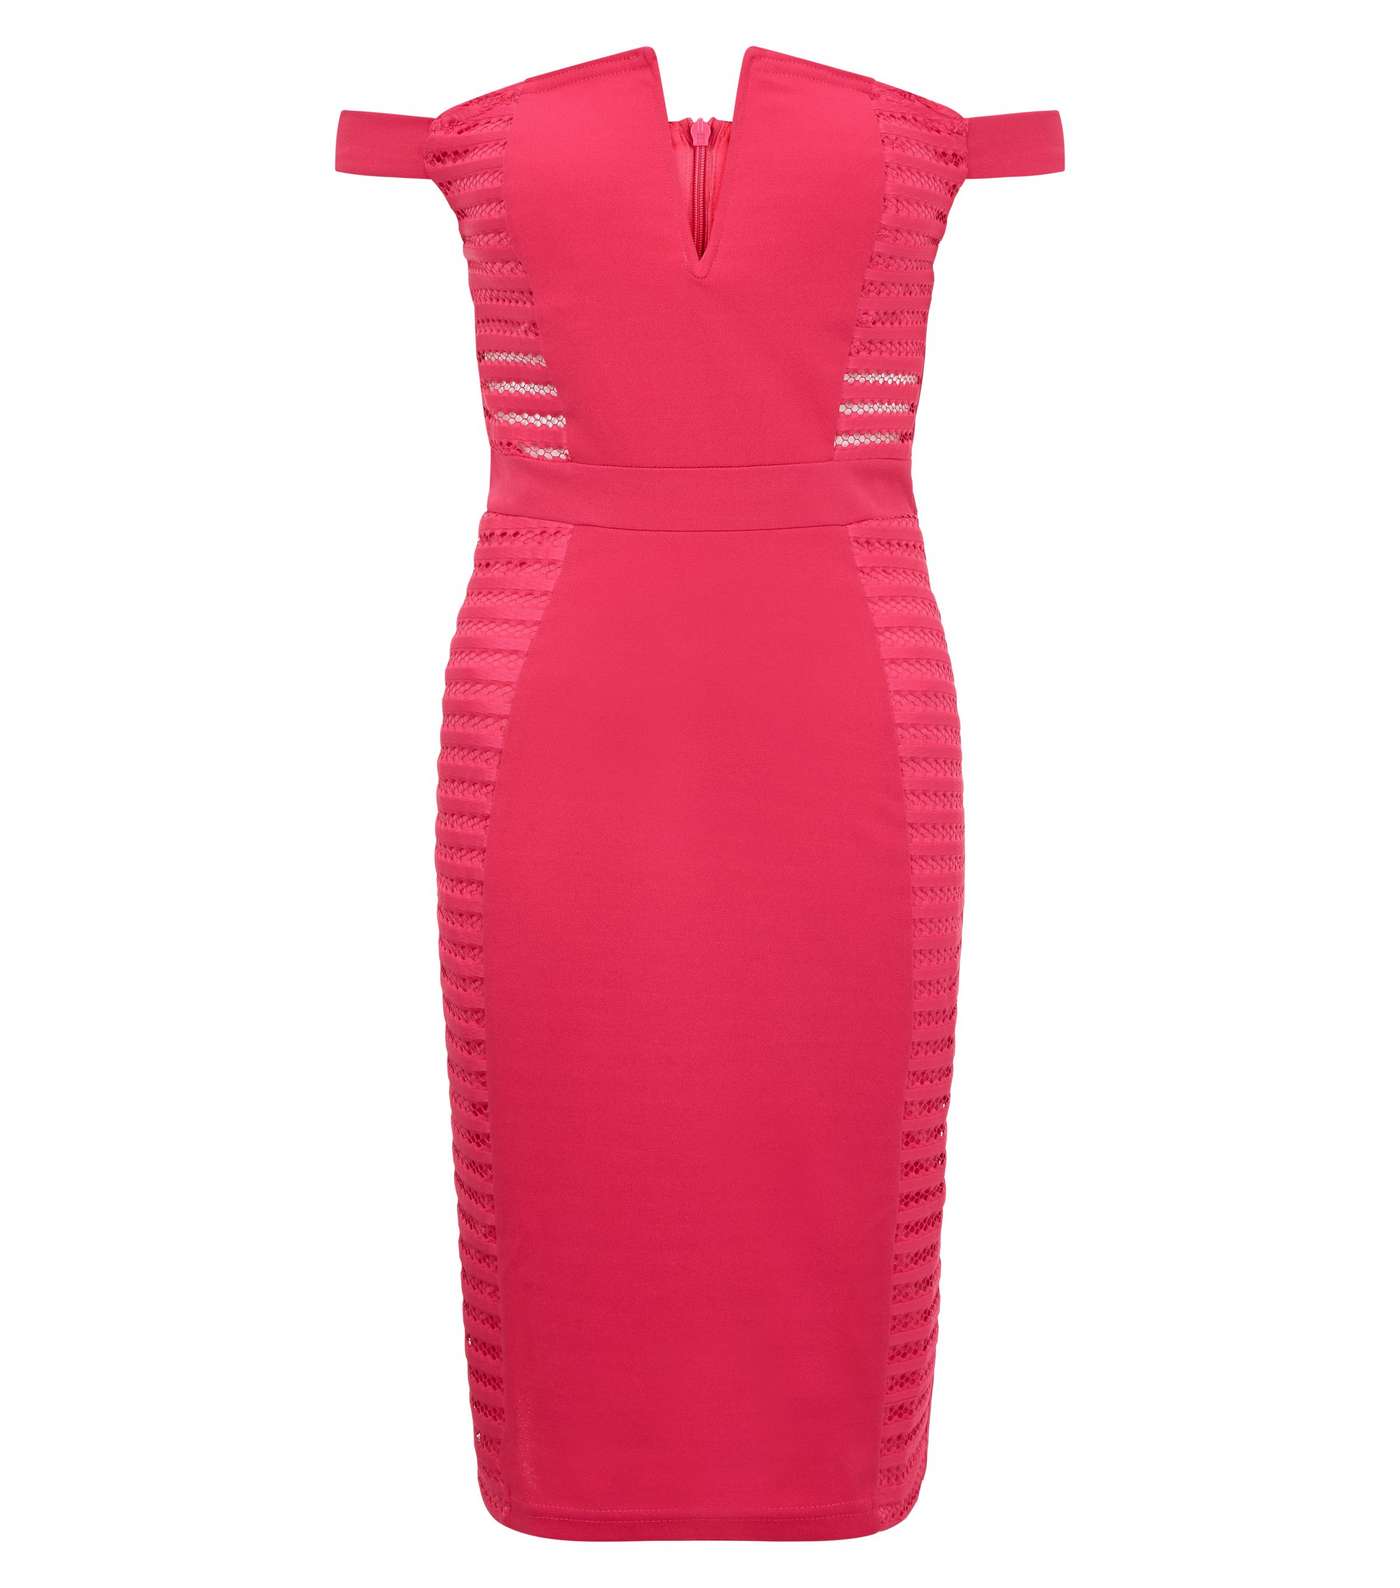 Parisian Bright Pink Cut Out Sides Bodycon Dress  Image 4